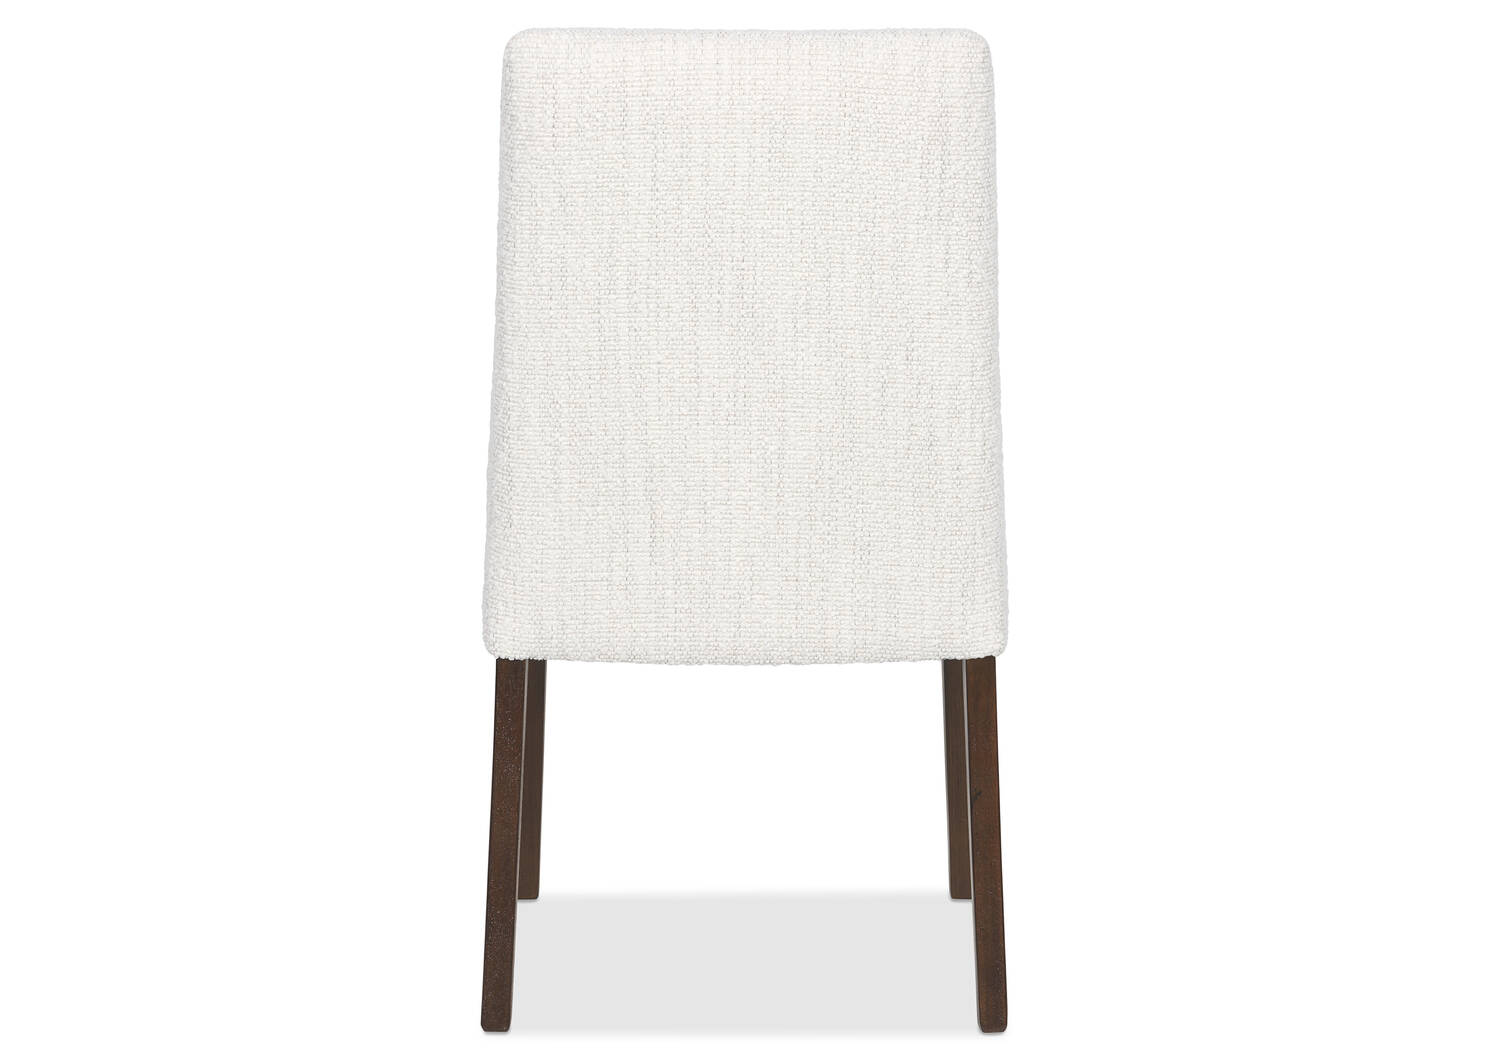 Montana Dining Chair -Luly Ivory